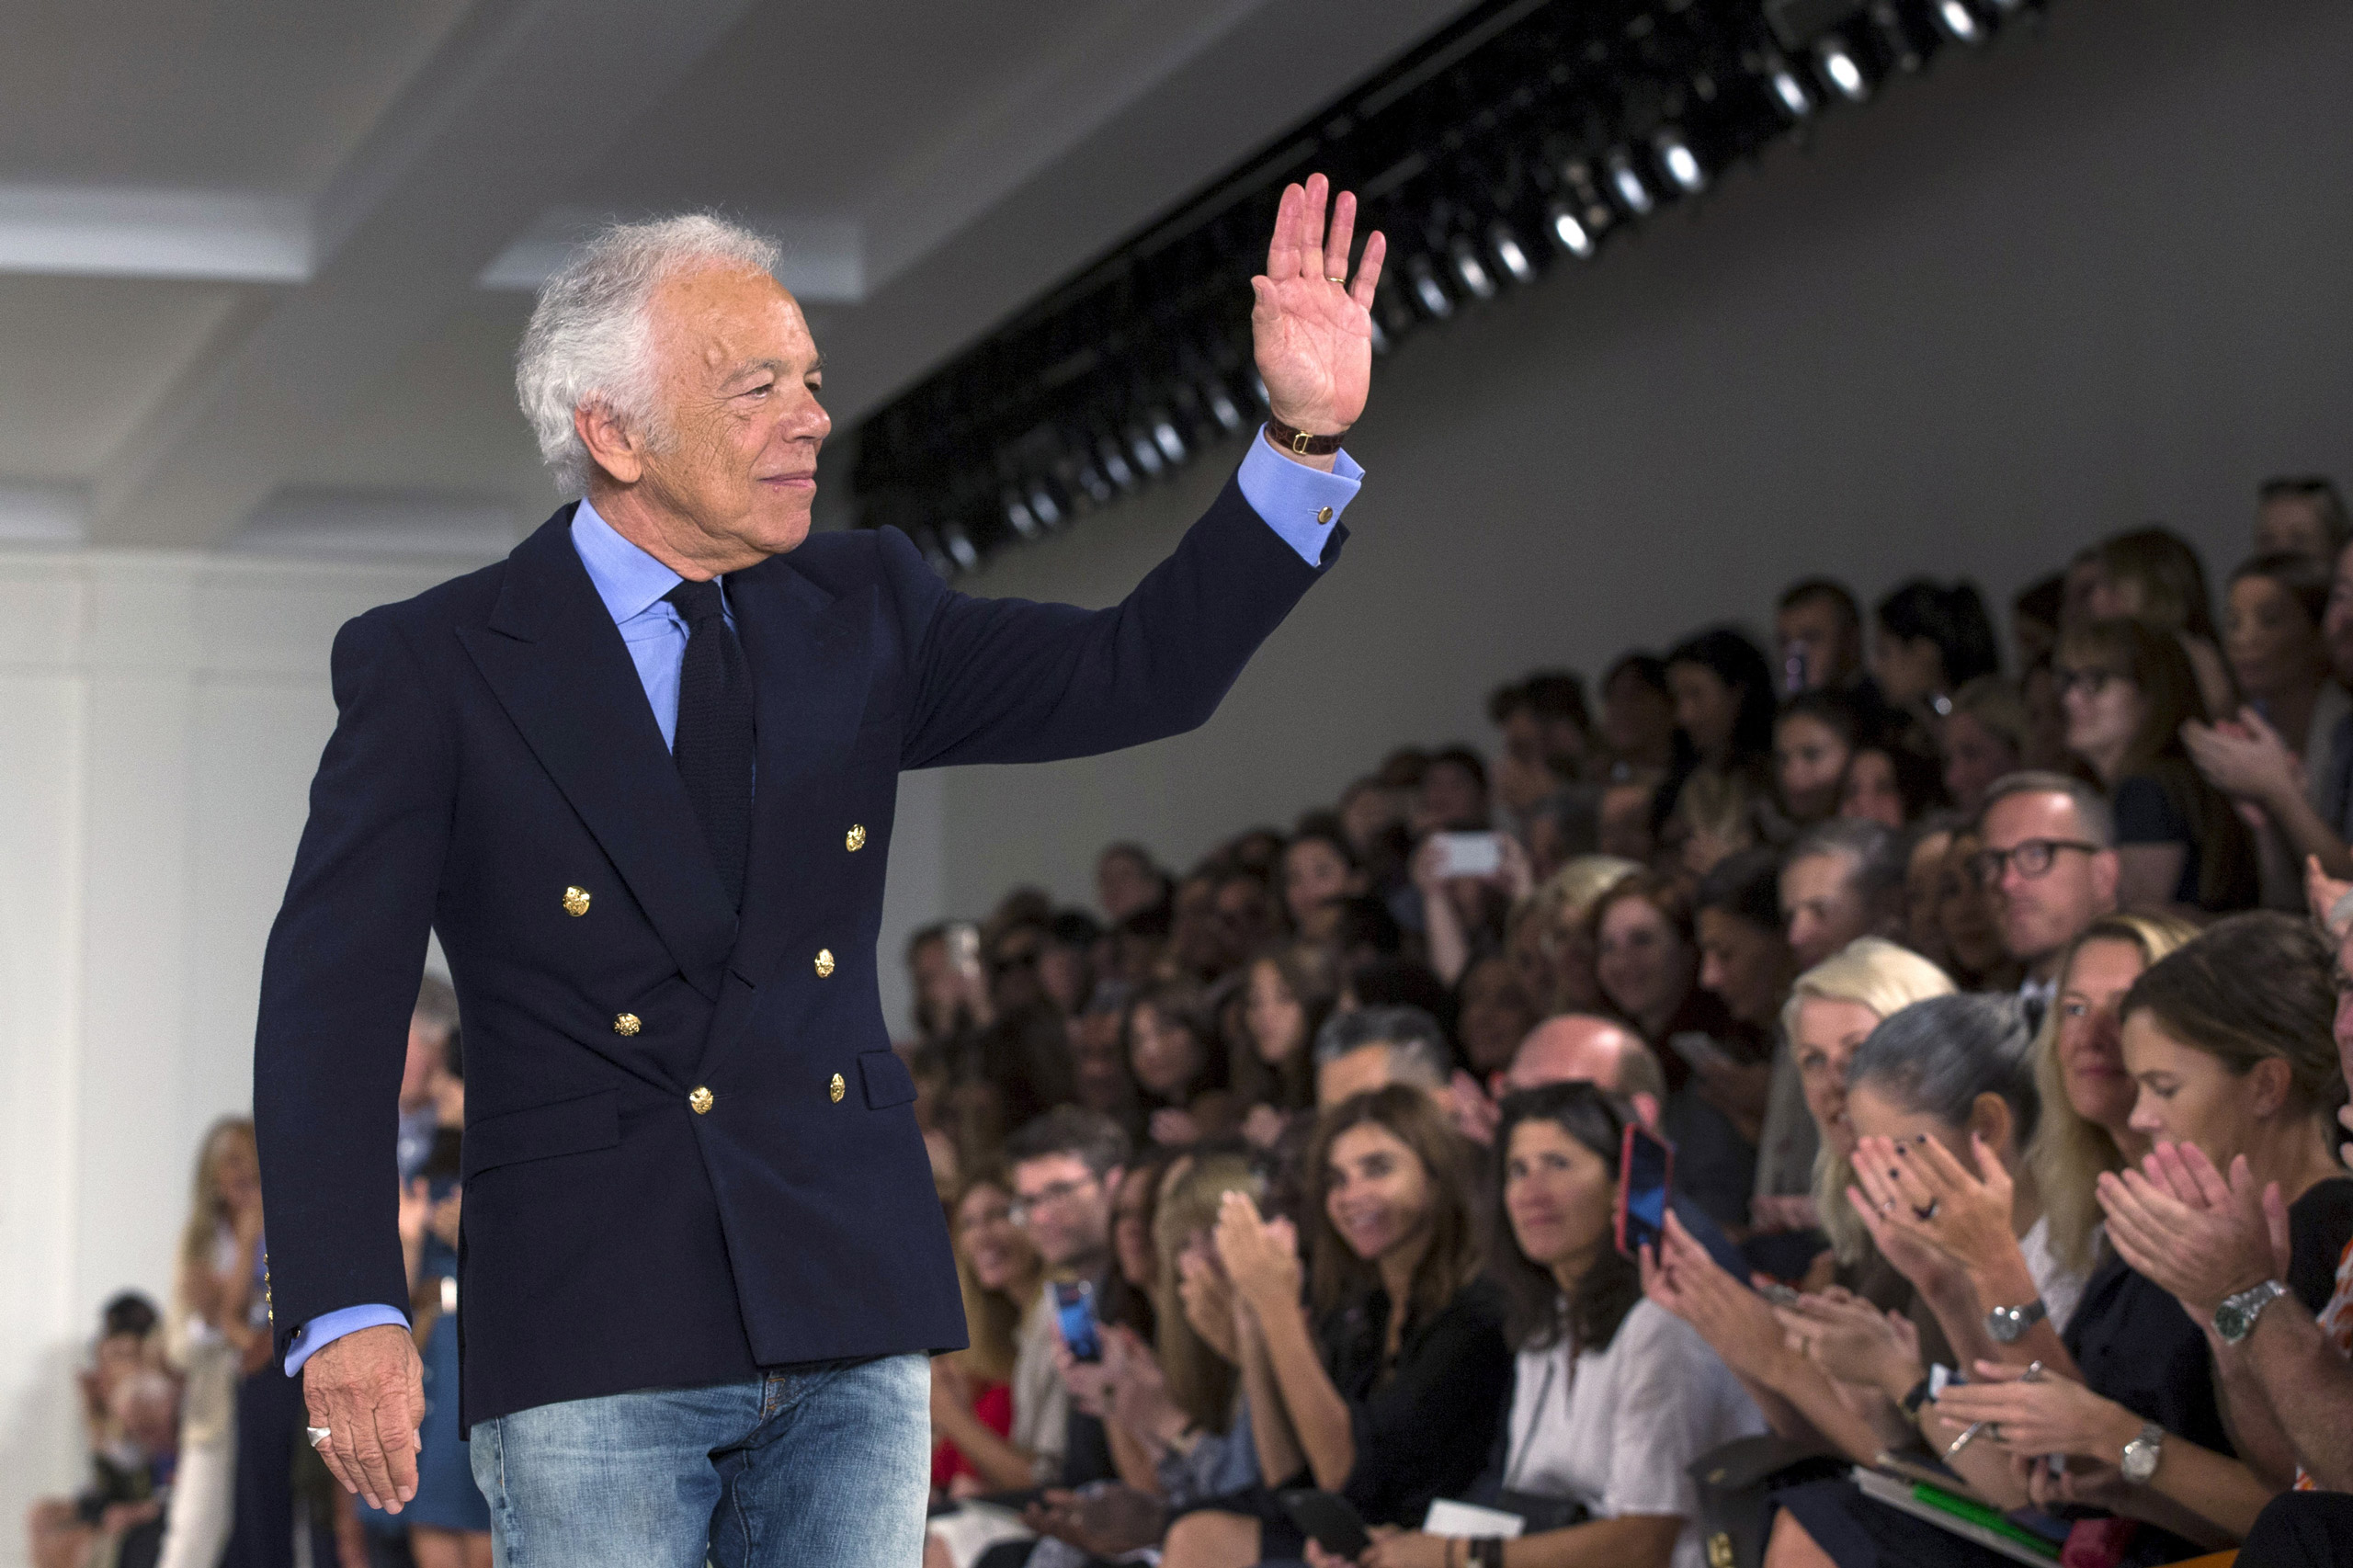 Designer Ralph Lauren greets the crowd after presenting his Spring/Summer 2016 collection during New York Fashion Week in New York, September 17, 2015. REUTERS/Lucas Jackson  - RTS1LE0